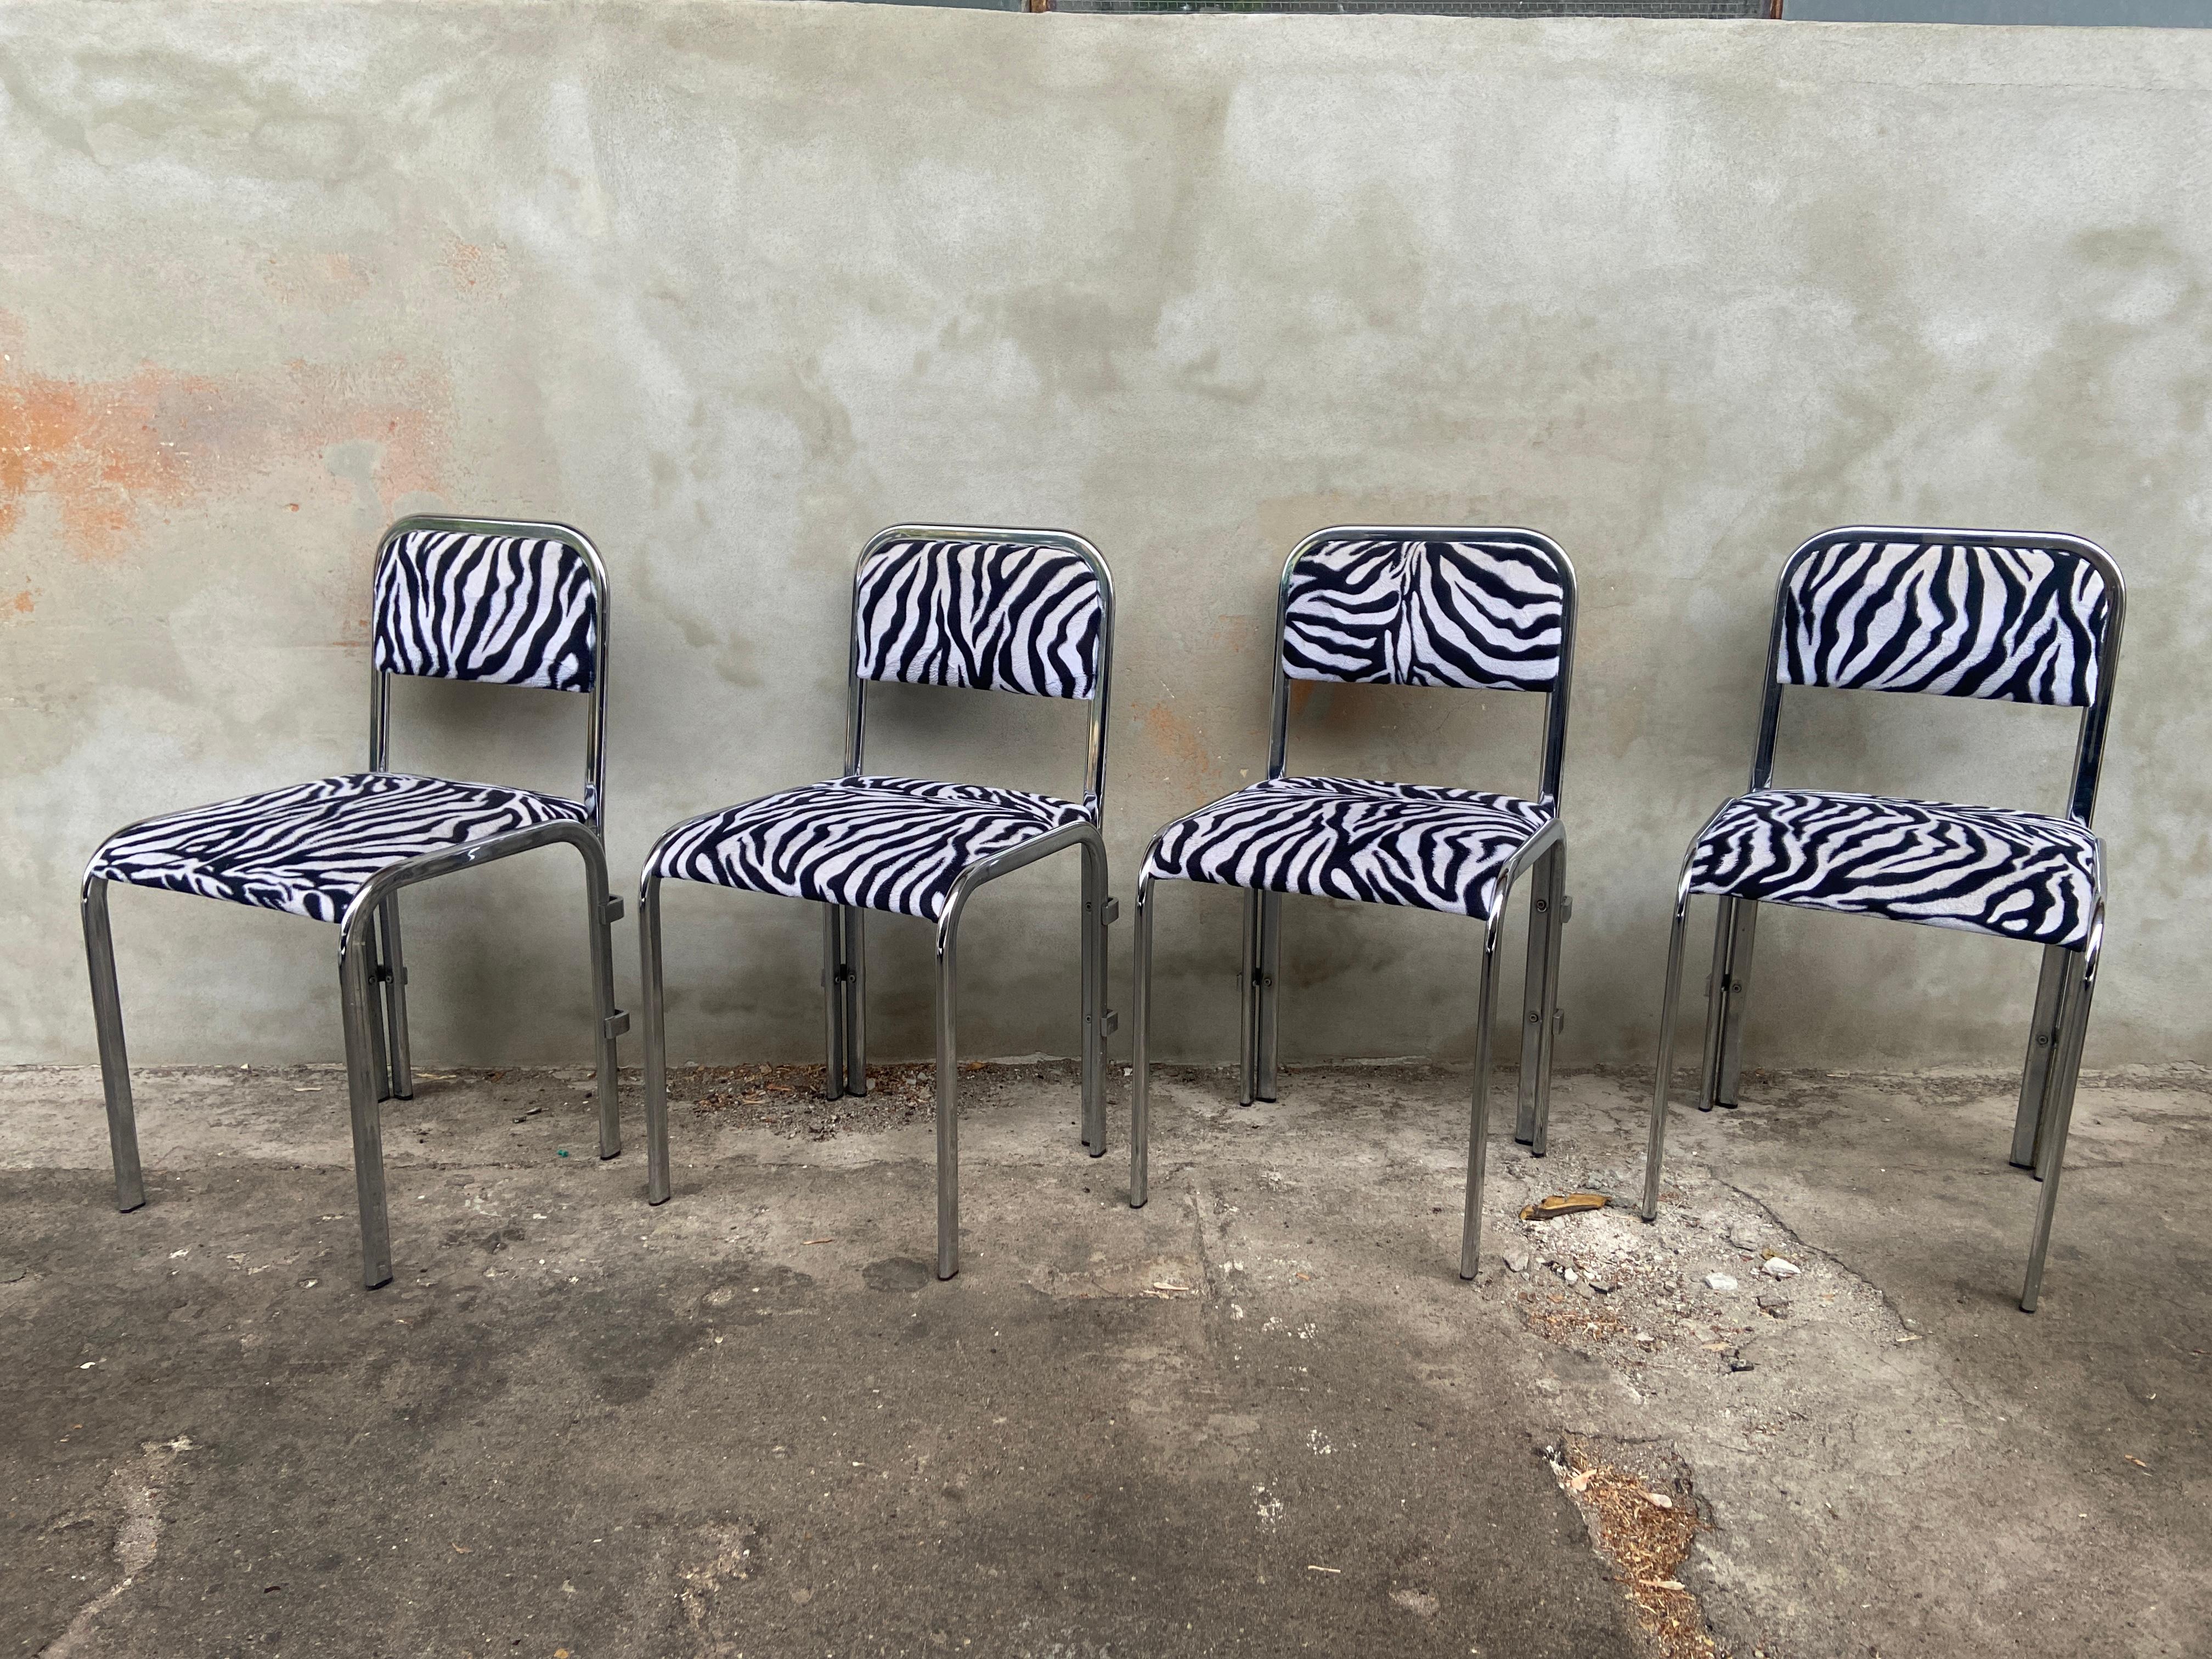 Mid-Century Modern French set of four chrome dining room chairs covered with its original zebra fabric. 1970s
The set is in really good vintage conditions with a beautiful patina due to age and use.
These chairs can come a complete dining room set